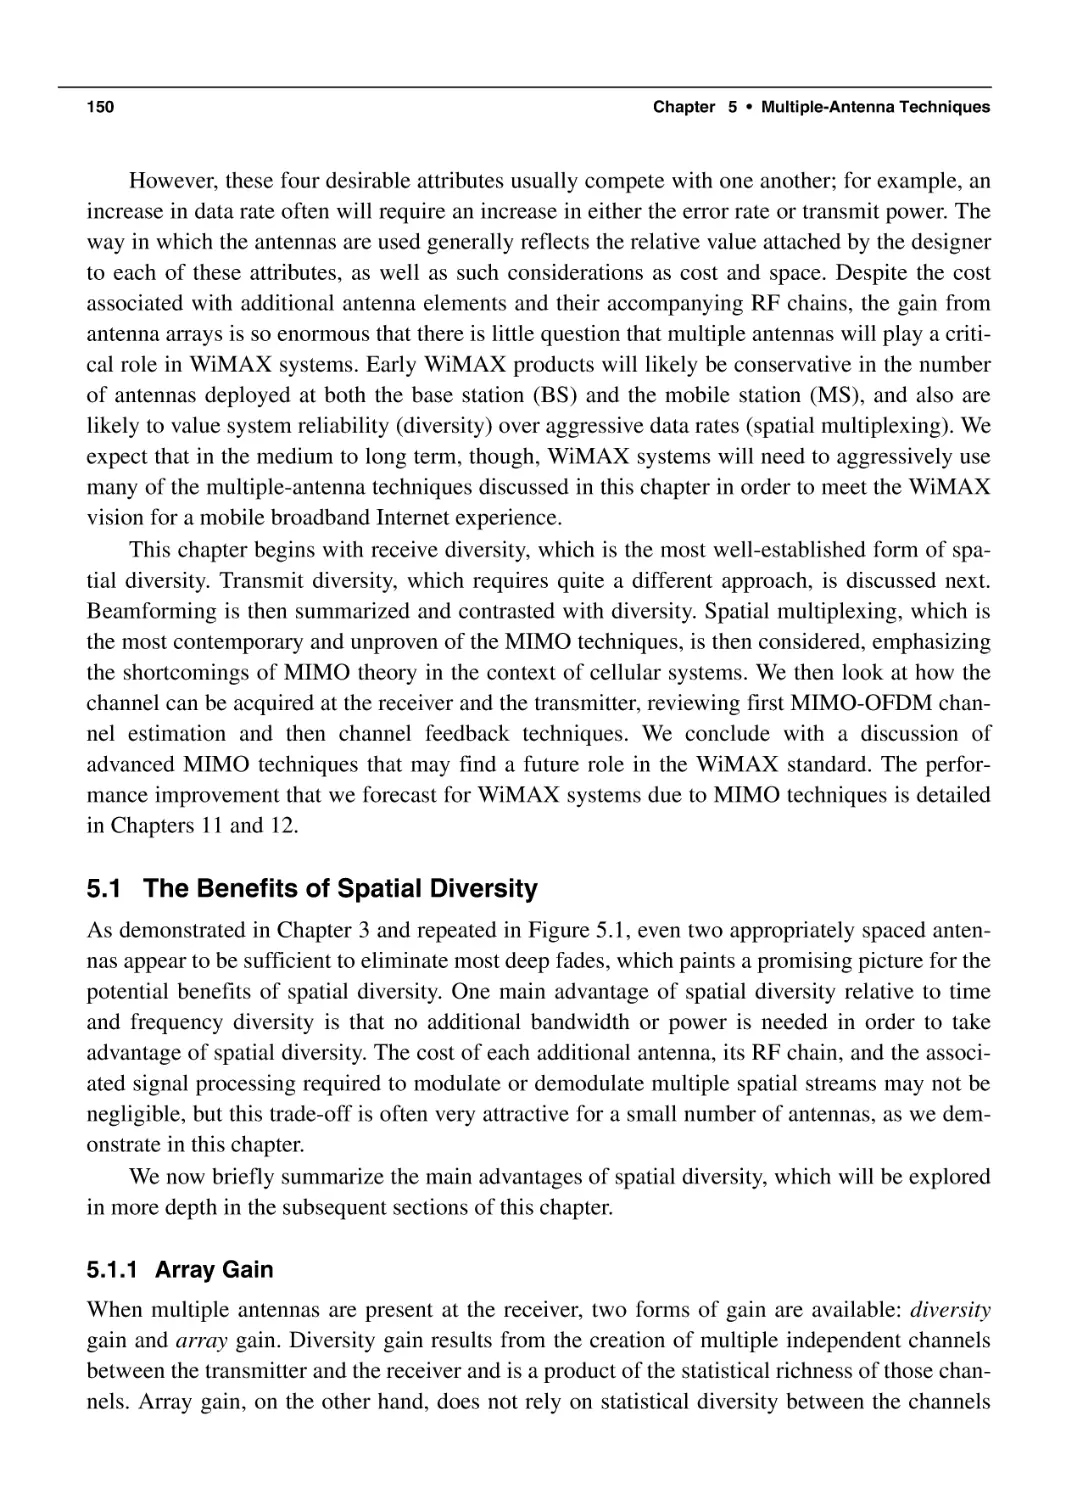 5.1 The Benefits of Spatial Diversity